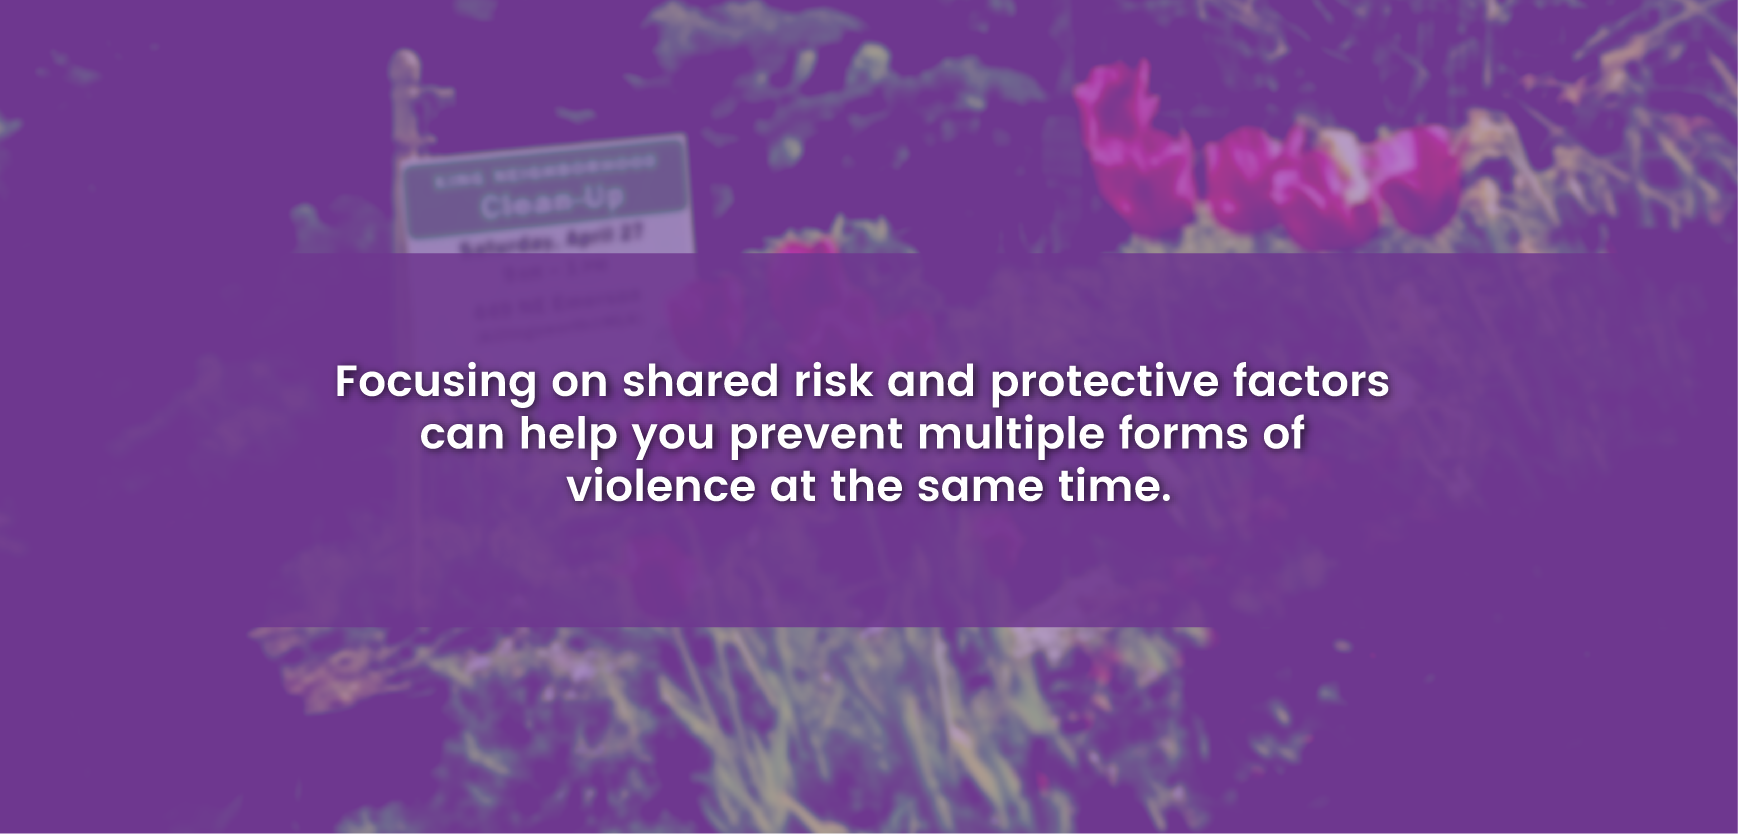 Focusing on shared risk and protective factors can help you prevent multiple forms of violence at the same time